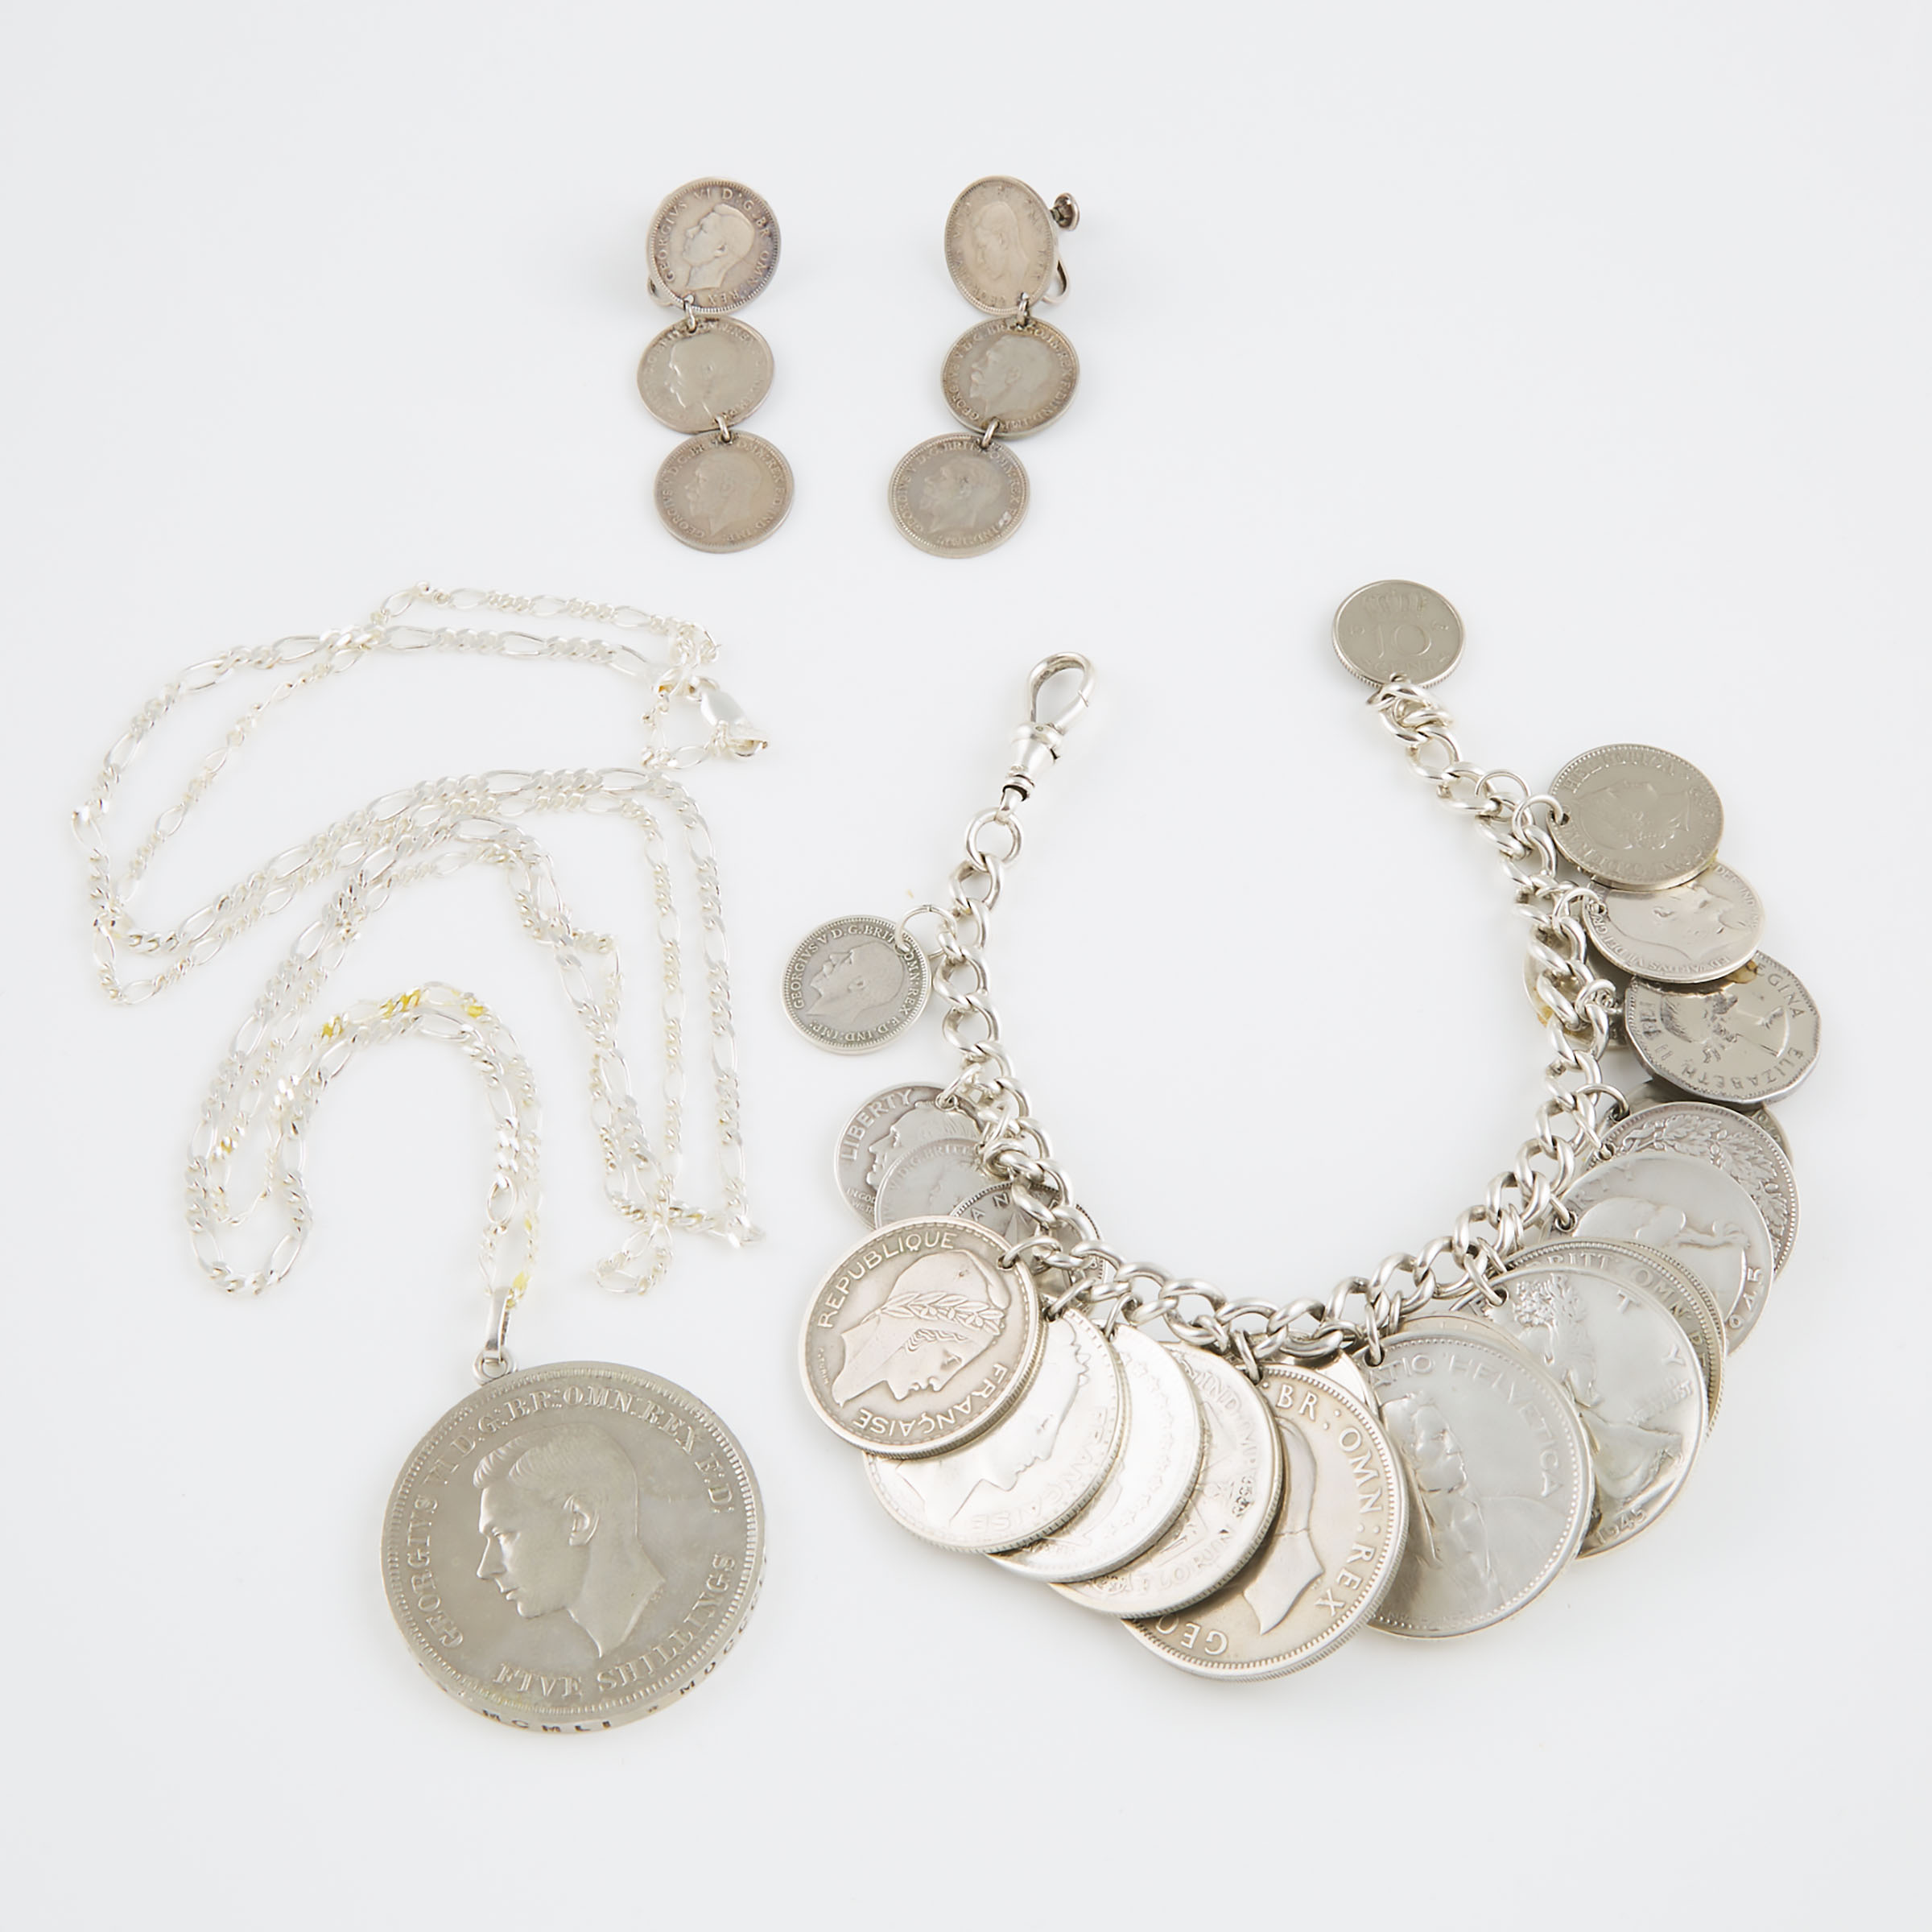 Small Quantity Of Silver Coin Jewellery 3ab454